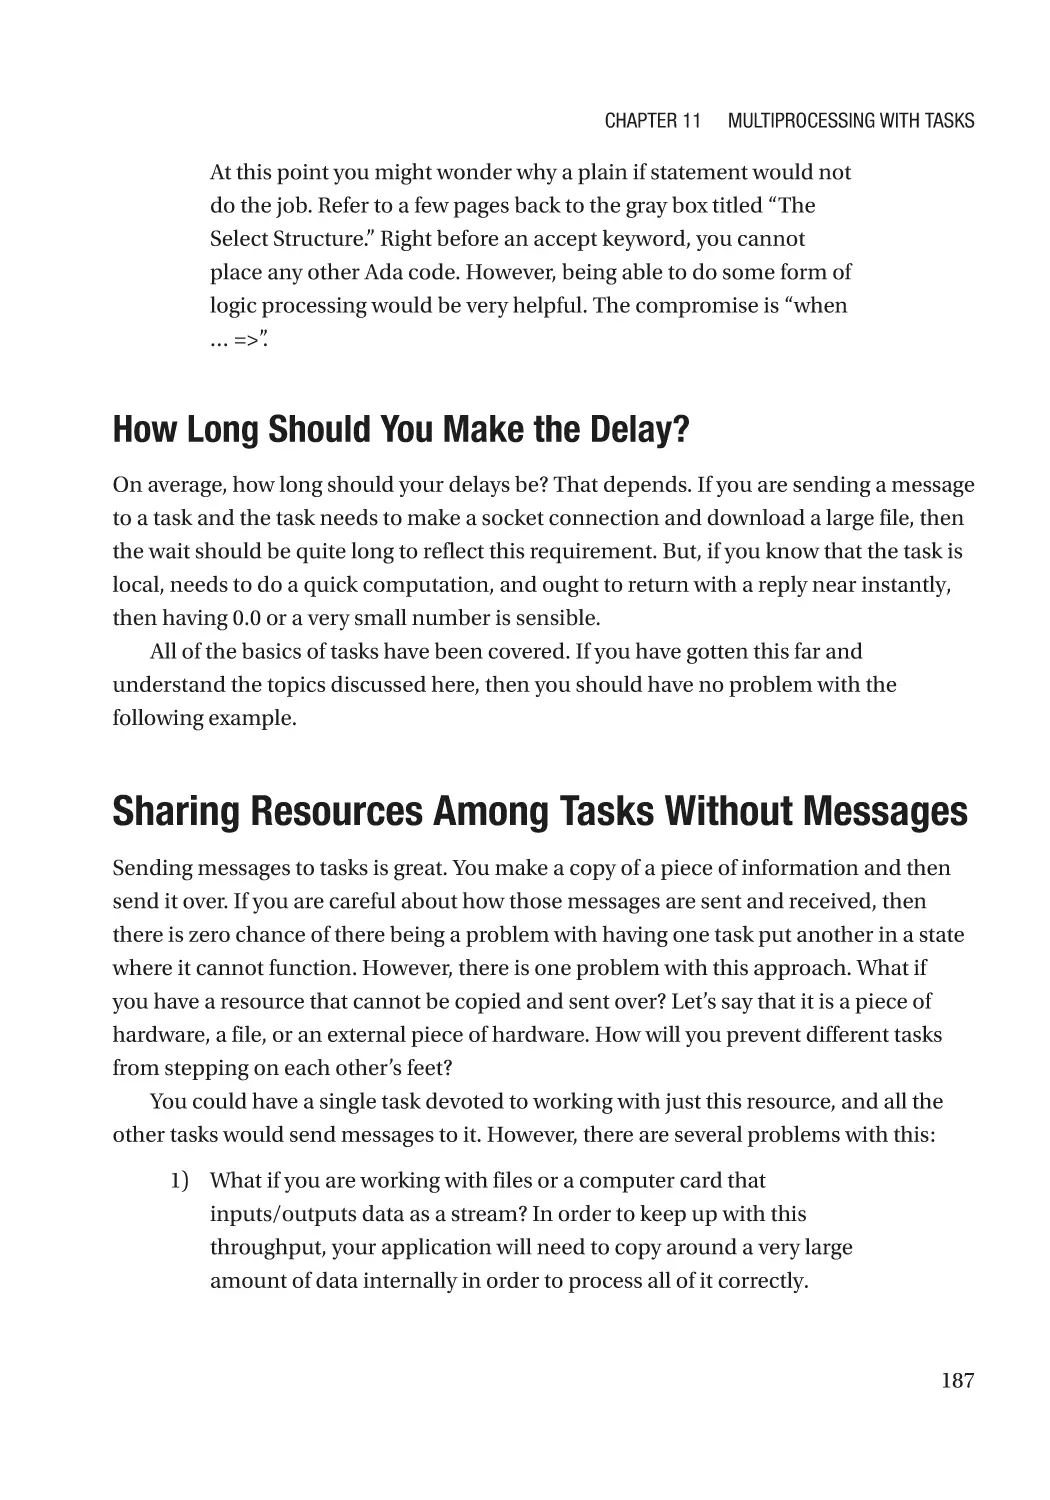 How Long Should You Make the Delay?
Sharing Resources Among Tasks Without Messages